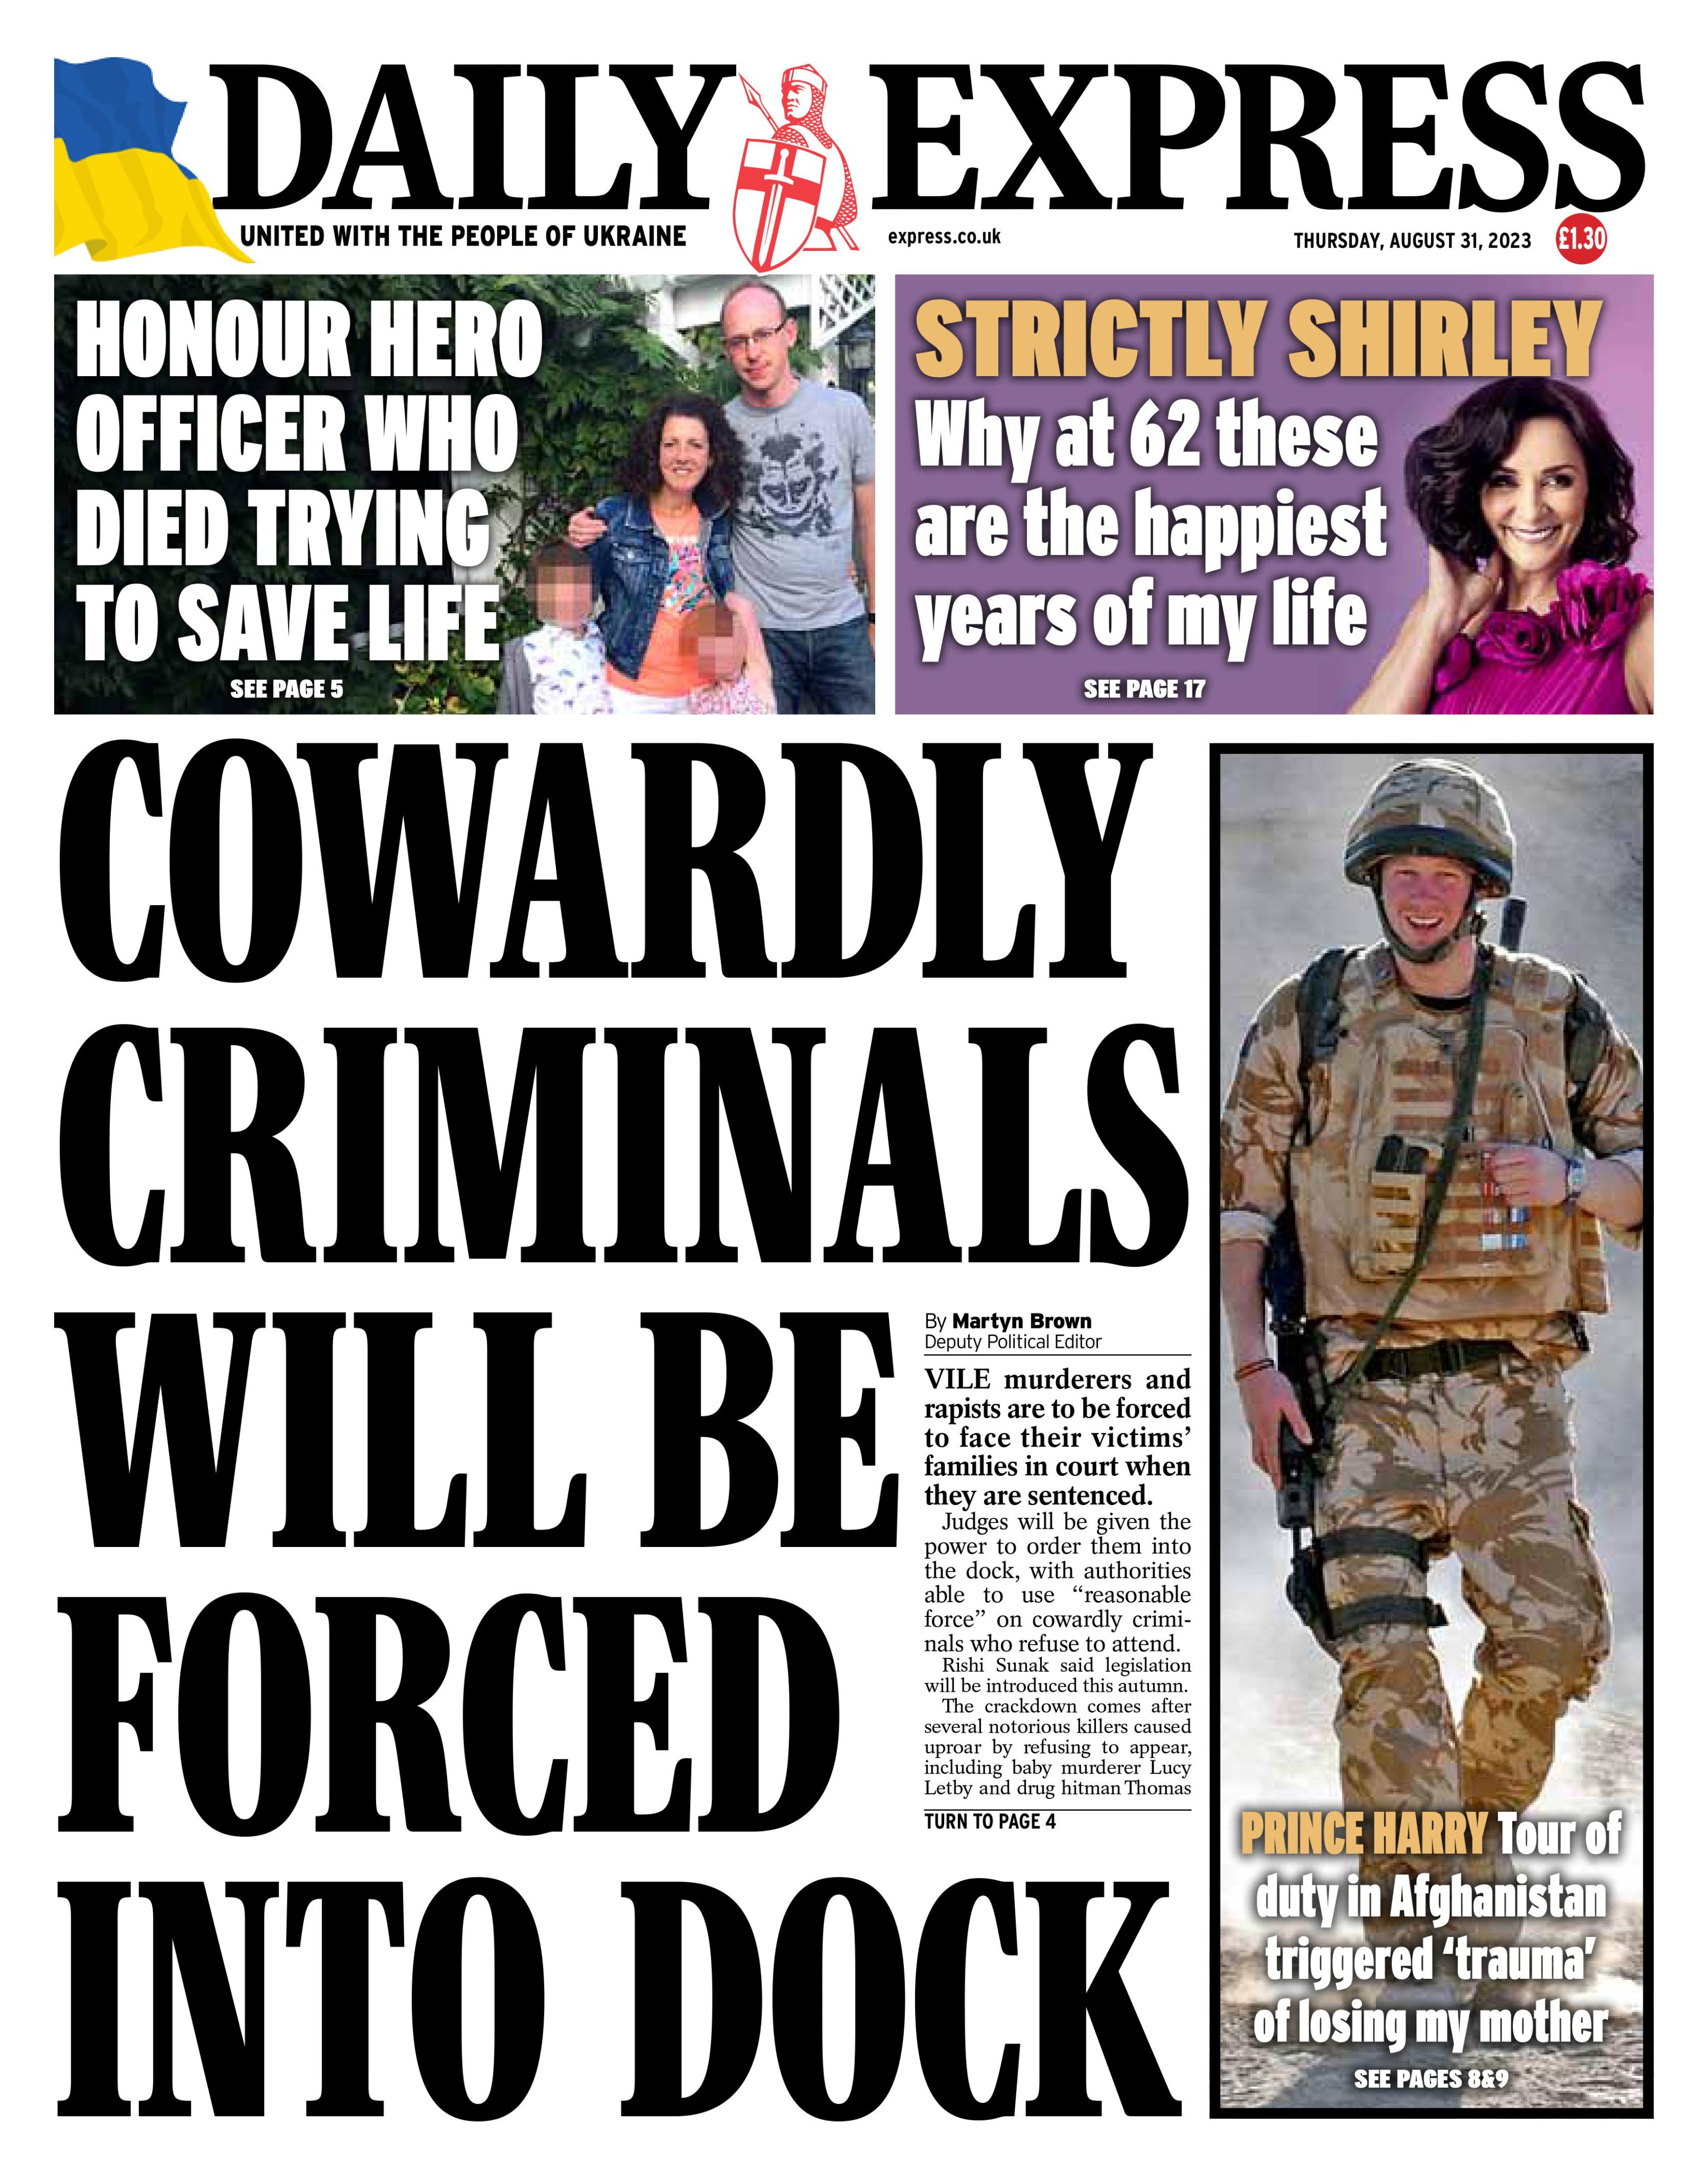 Cowardly criminals will be forced into dock #tomorrowspapertoday